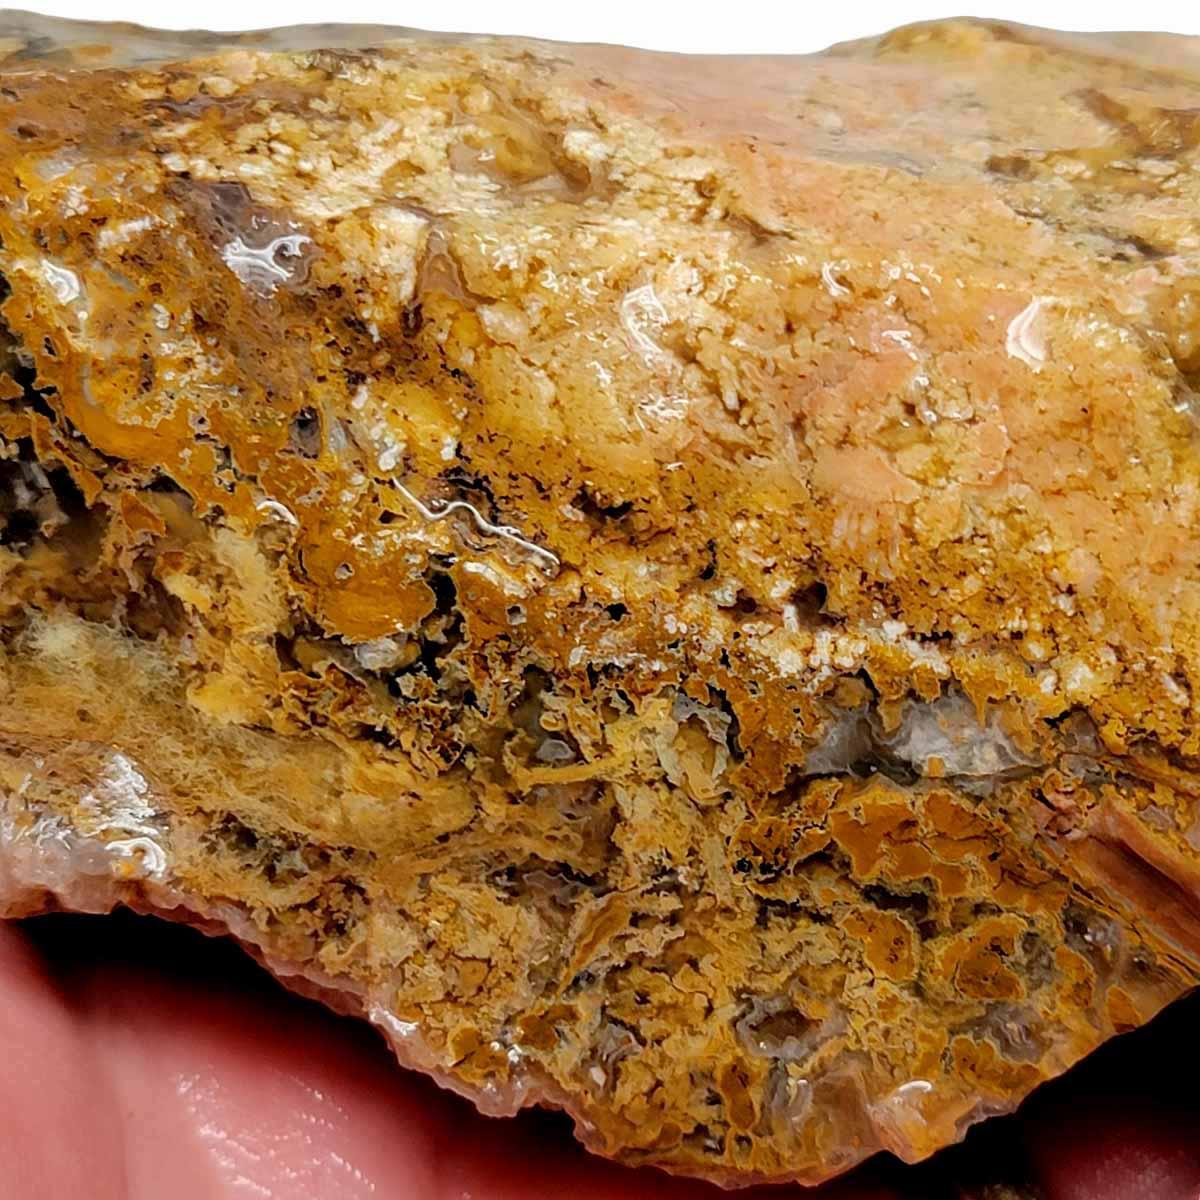 Eagle Rock Plume Agate Rough Chunk! - LapidaryCentral